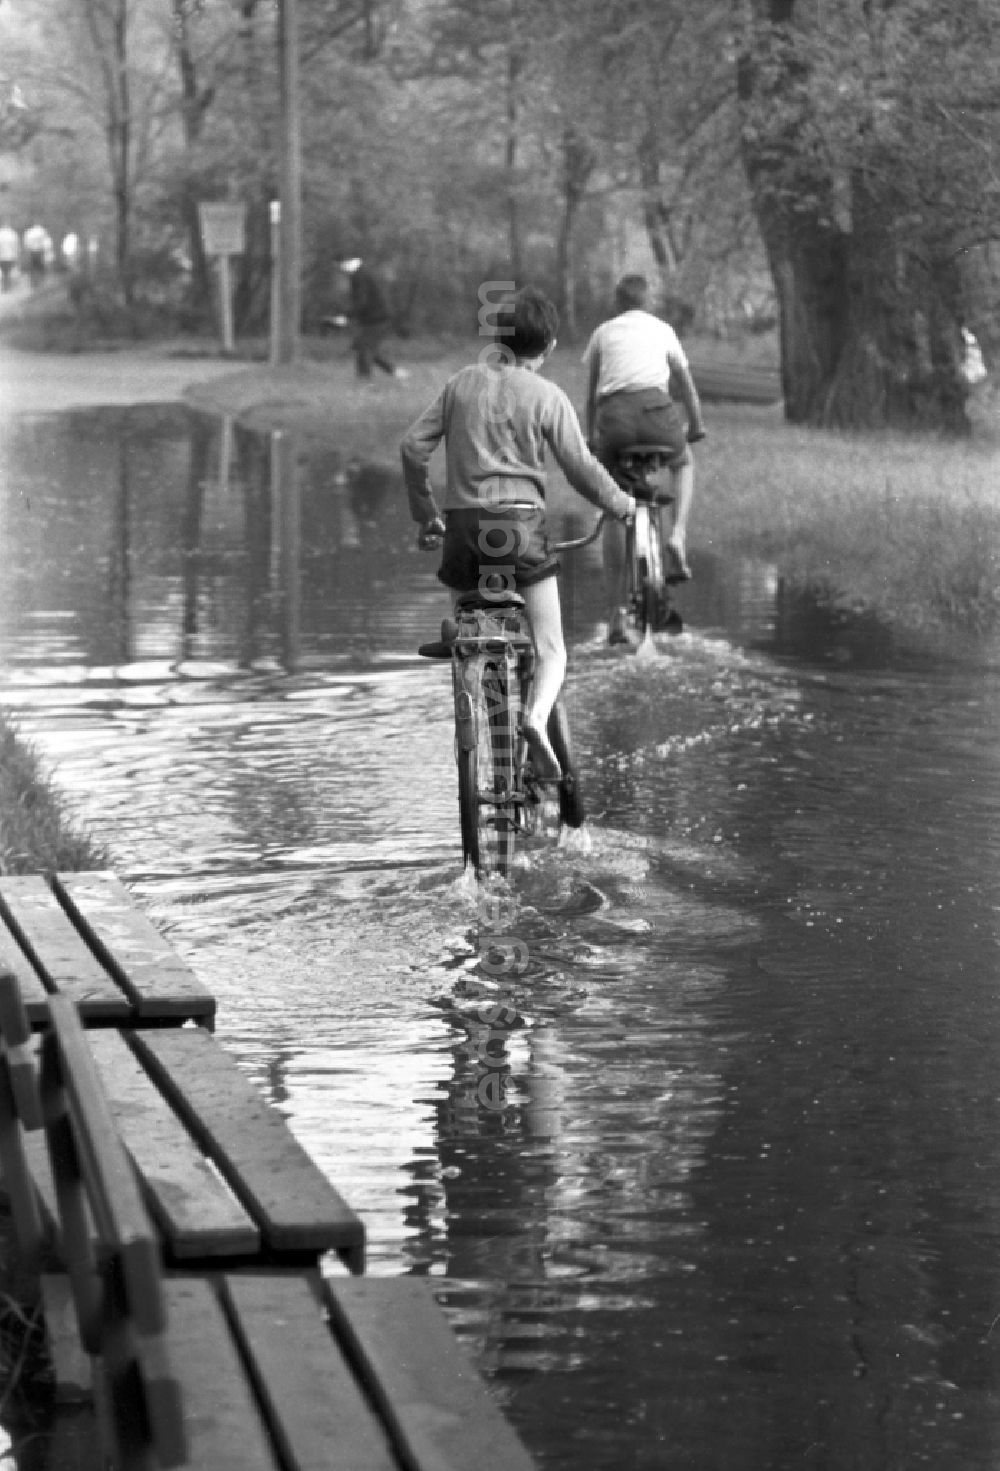 GDR photo archive: Dessau - 2 boys ride their bikes through a large puddle in the city park in Dessau in Saxony - Anhalt